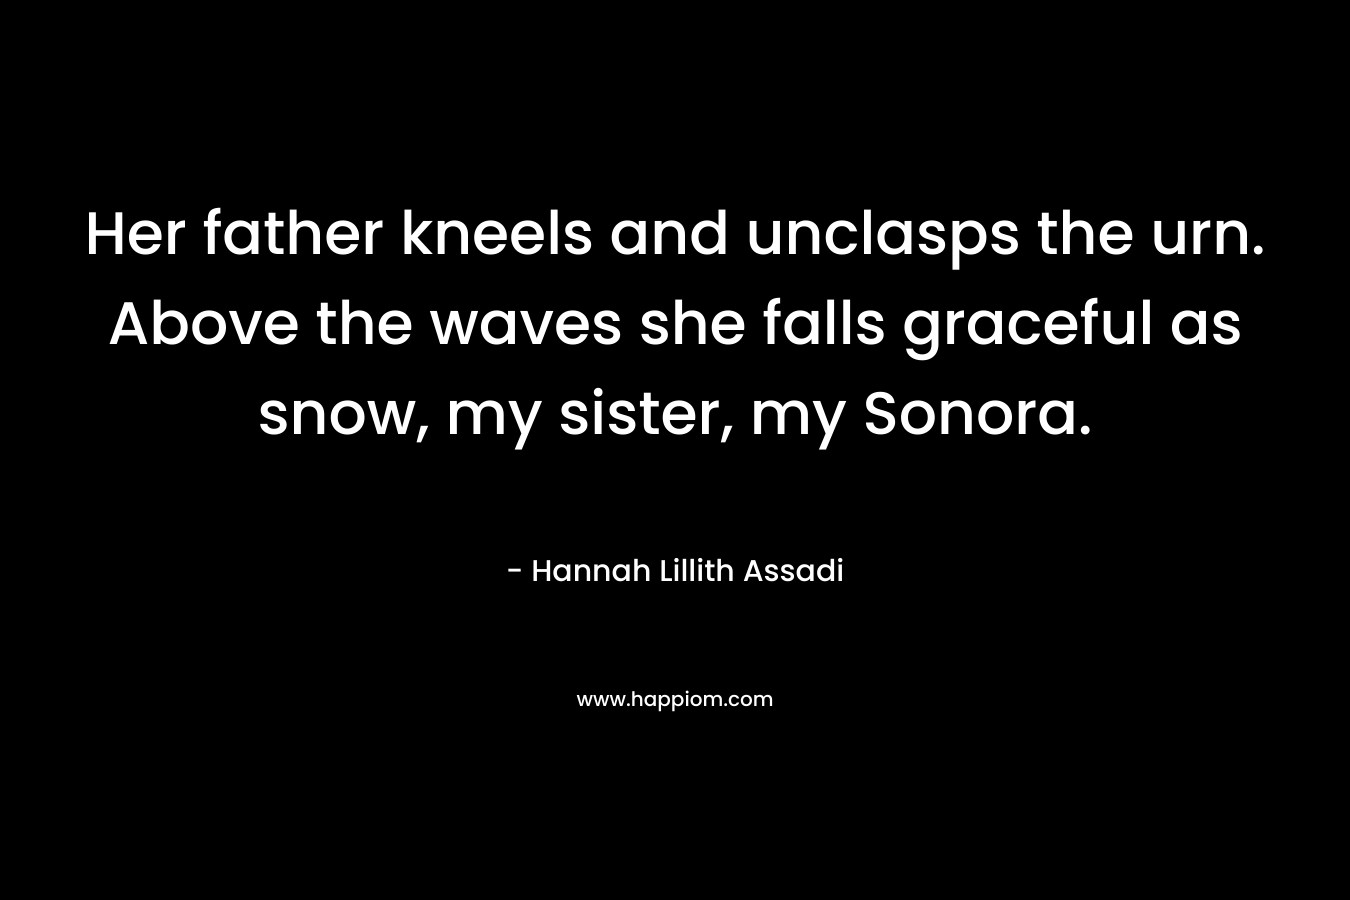 Her father kneels and unclasps the urn. Above the waves she falls graceful as snow, my sister, my Sonora.